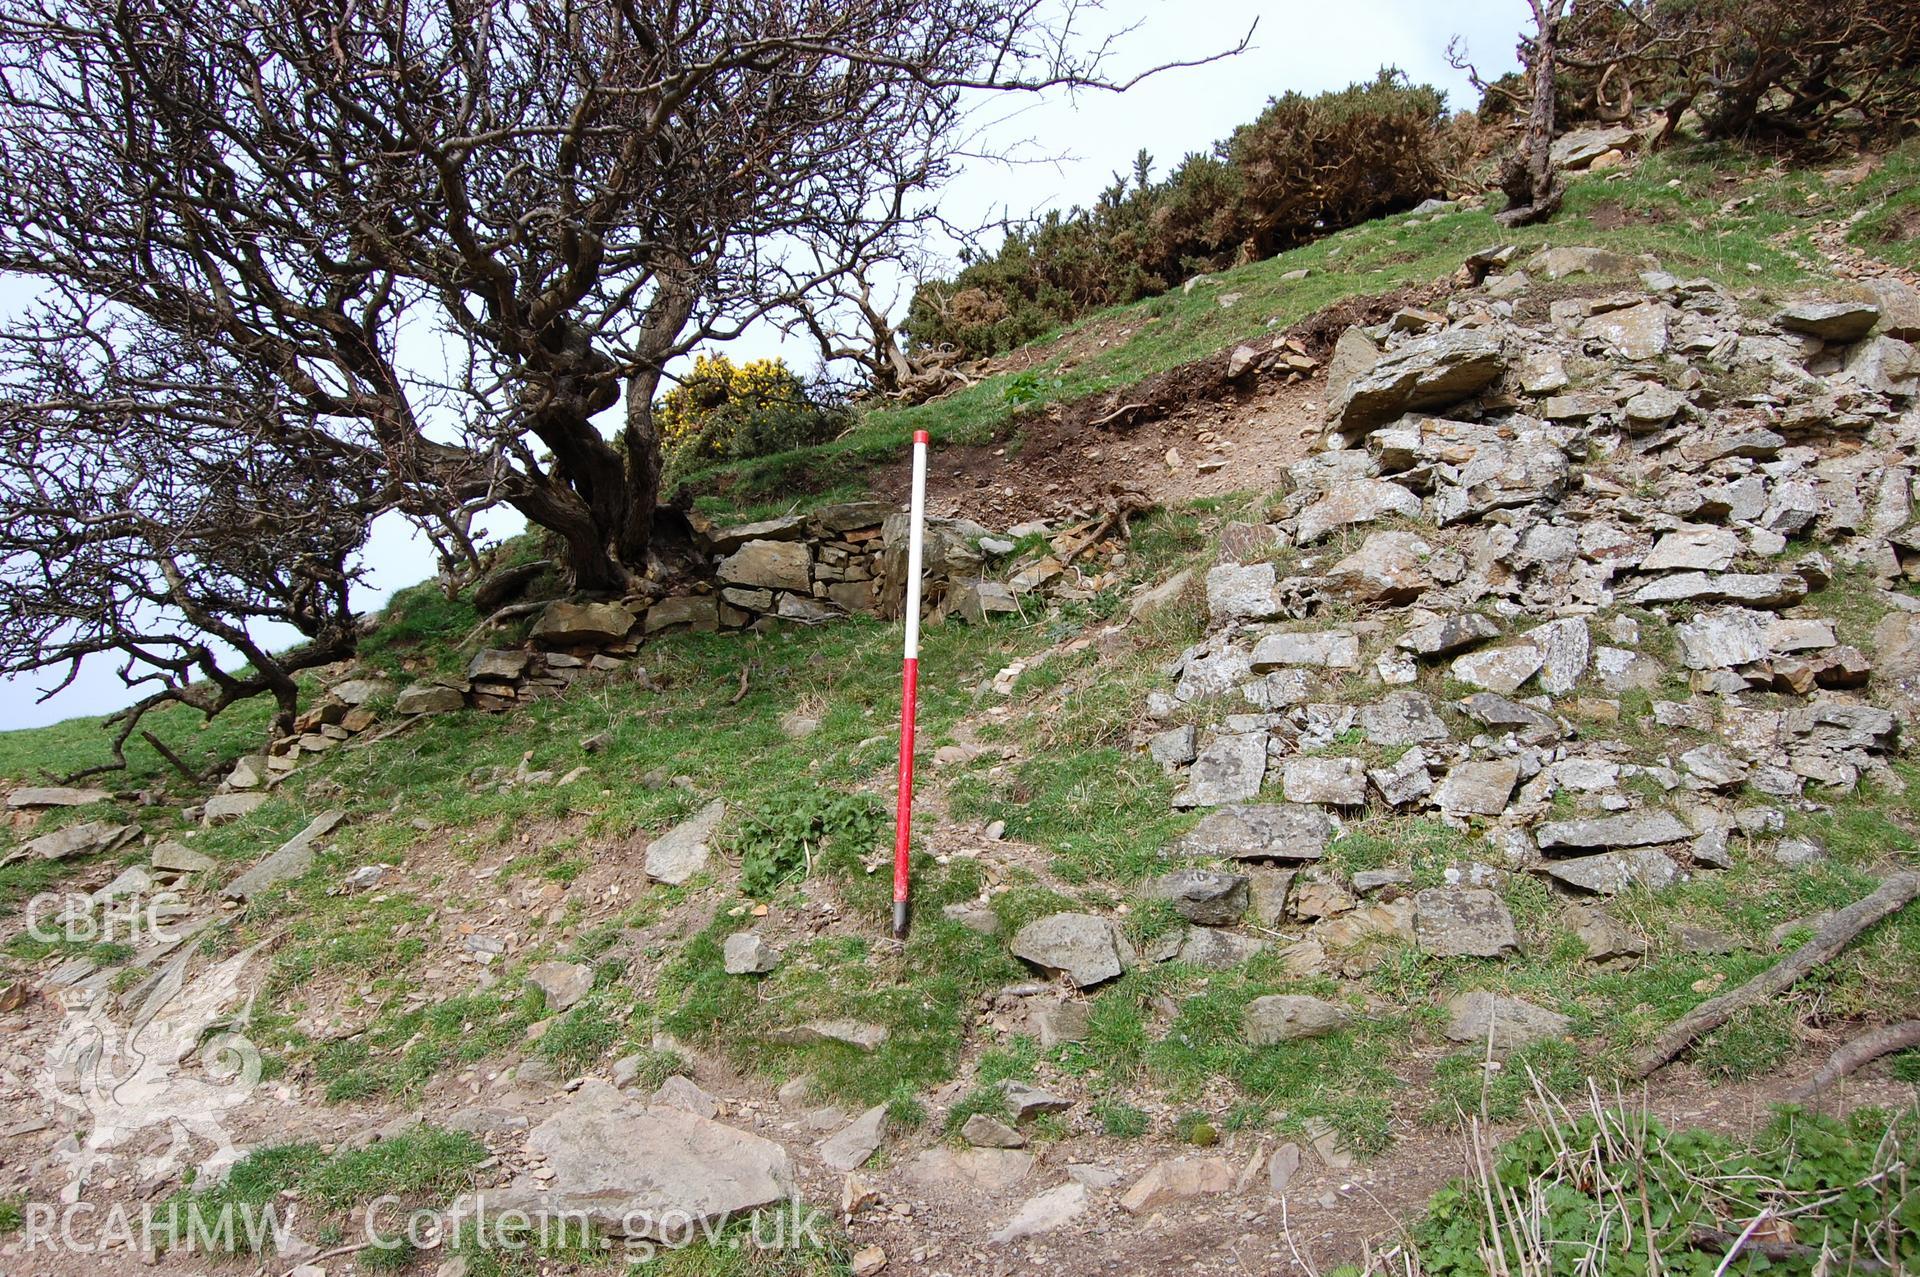 Digital photograph from an archaeological assessment of Deganwy Castle, carried out by Gwynedd Archaeological Trust, 2009. Remains of square tower (?) on South wall.